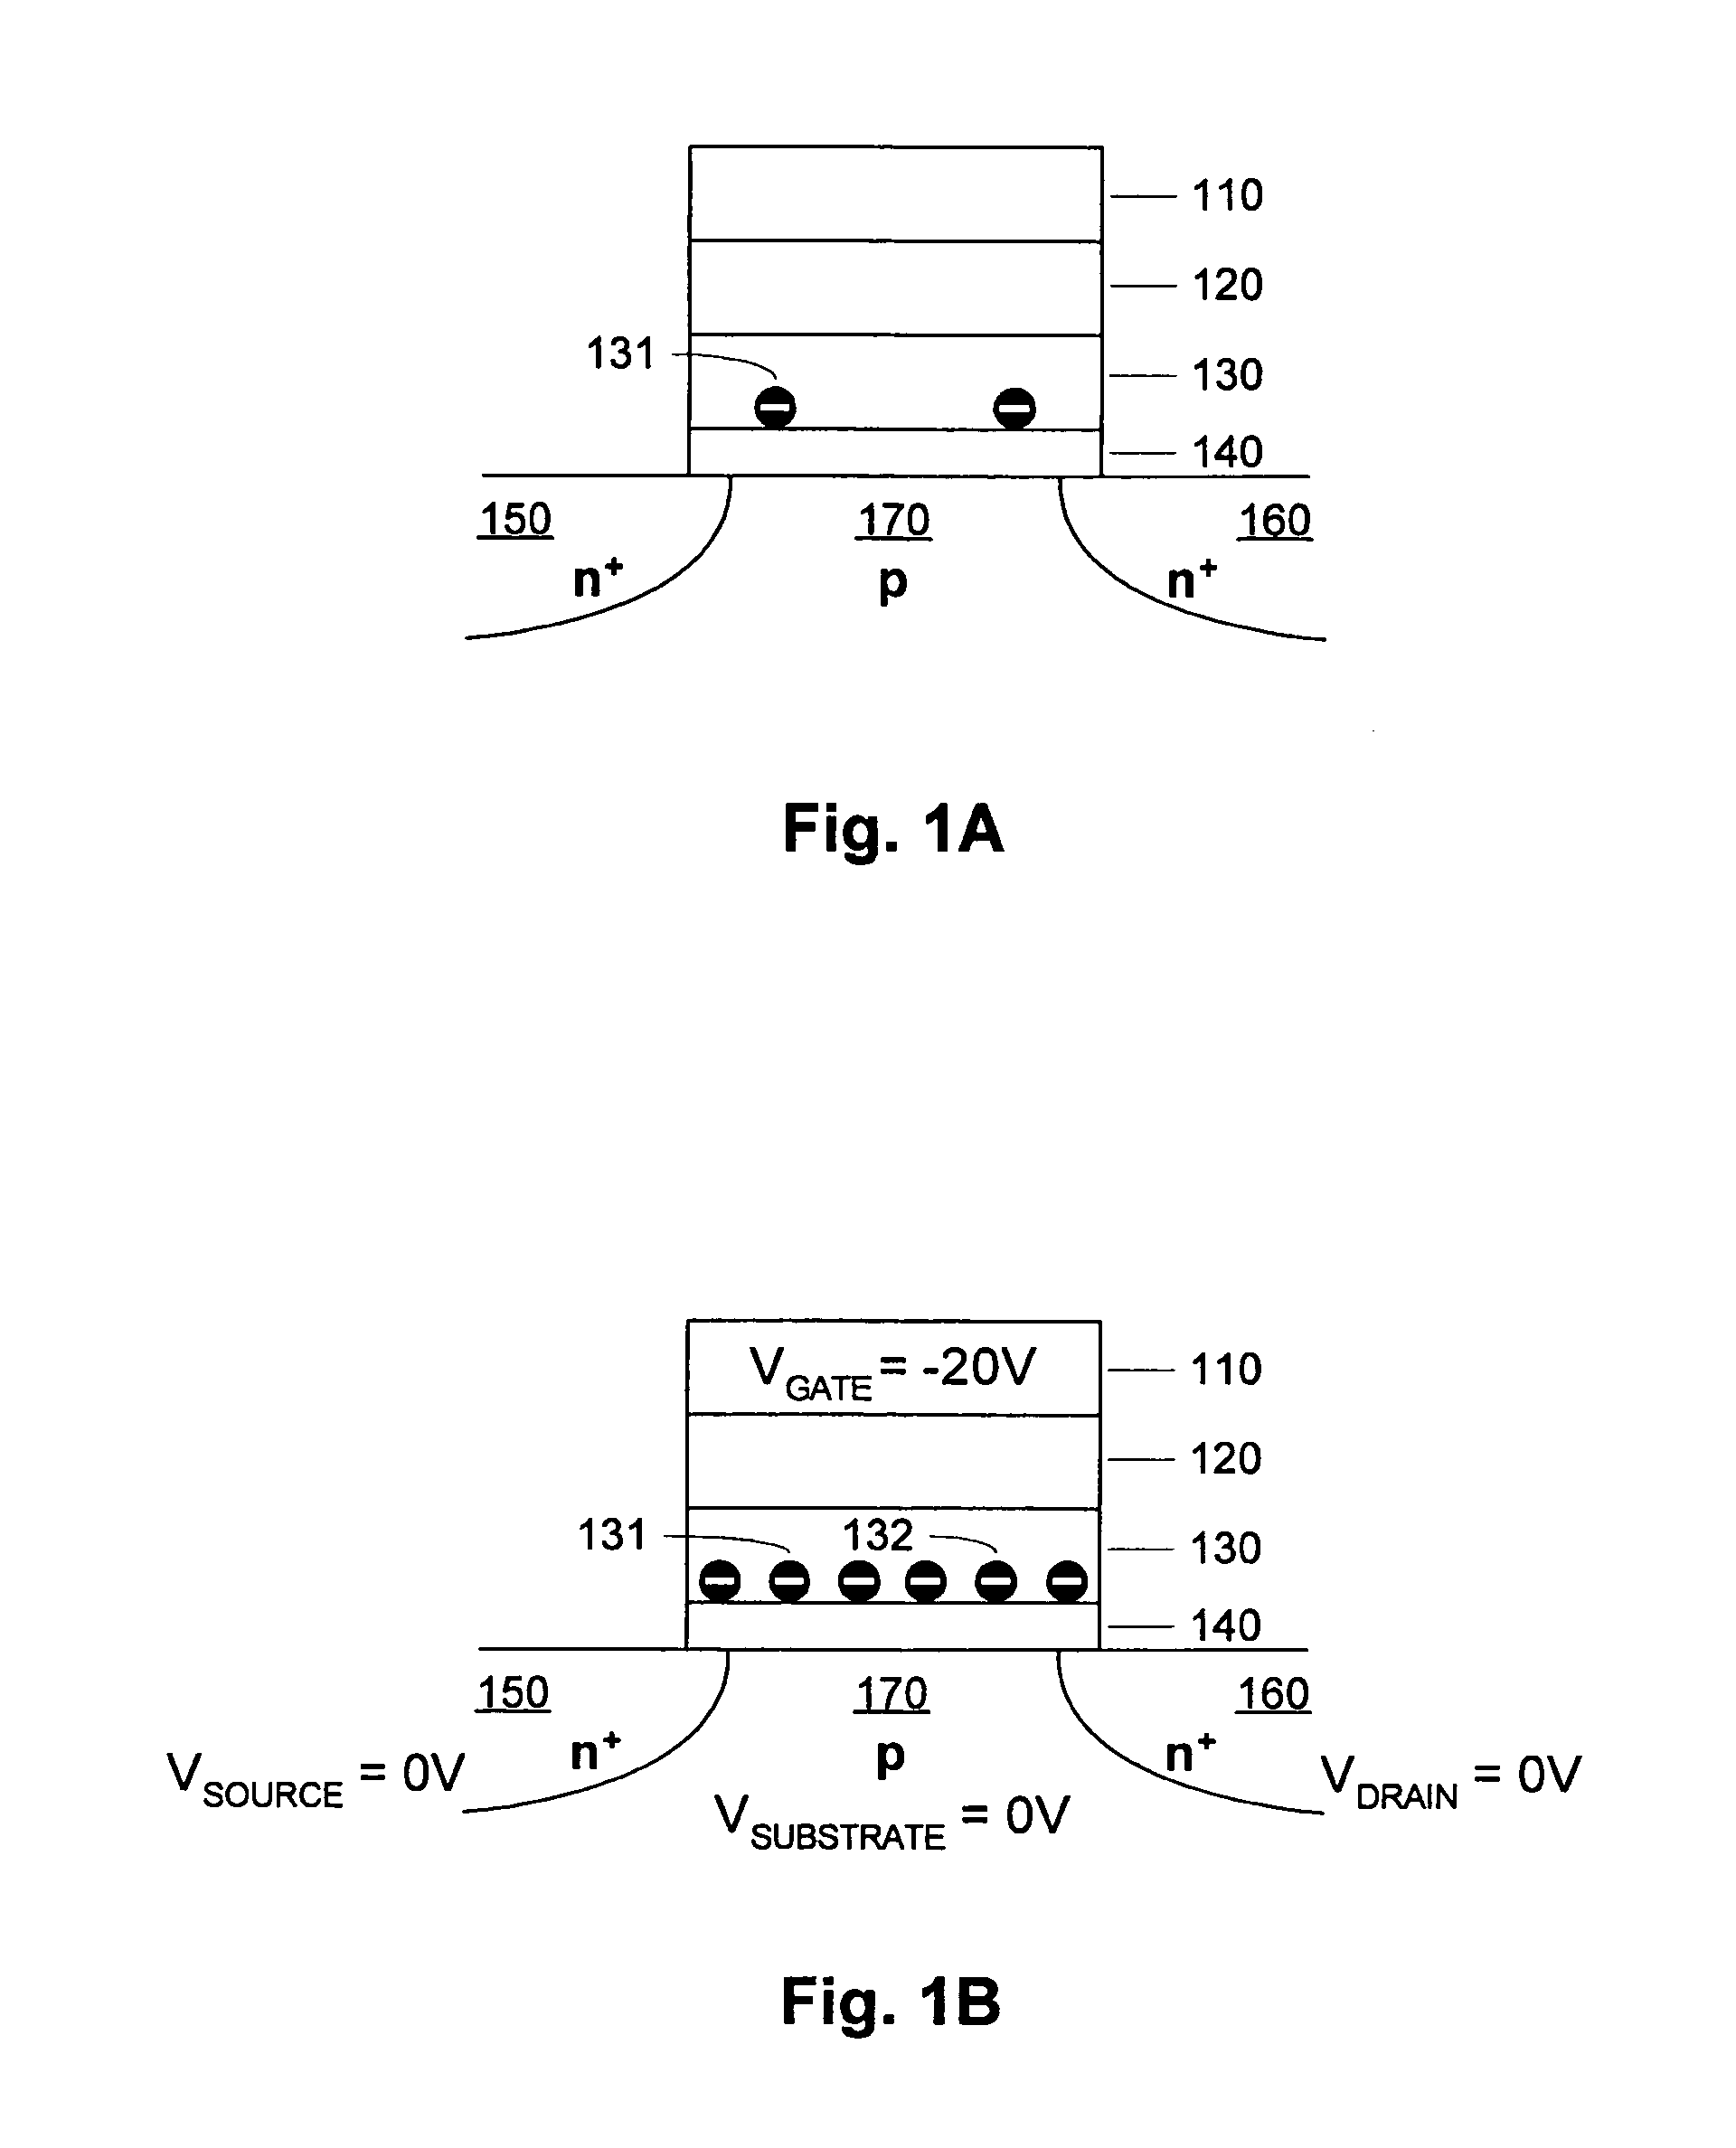 Operation scheme with charge balancing for charge trapping non-volatile memory